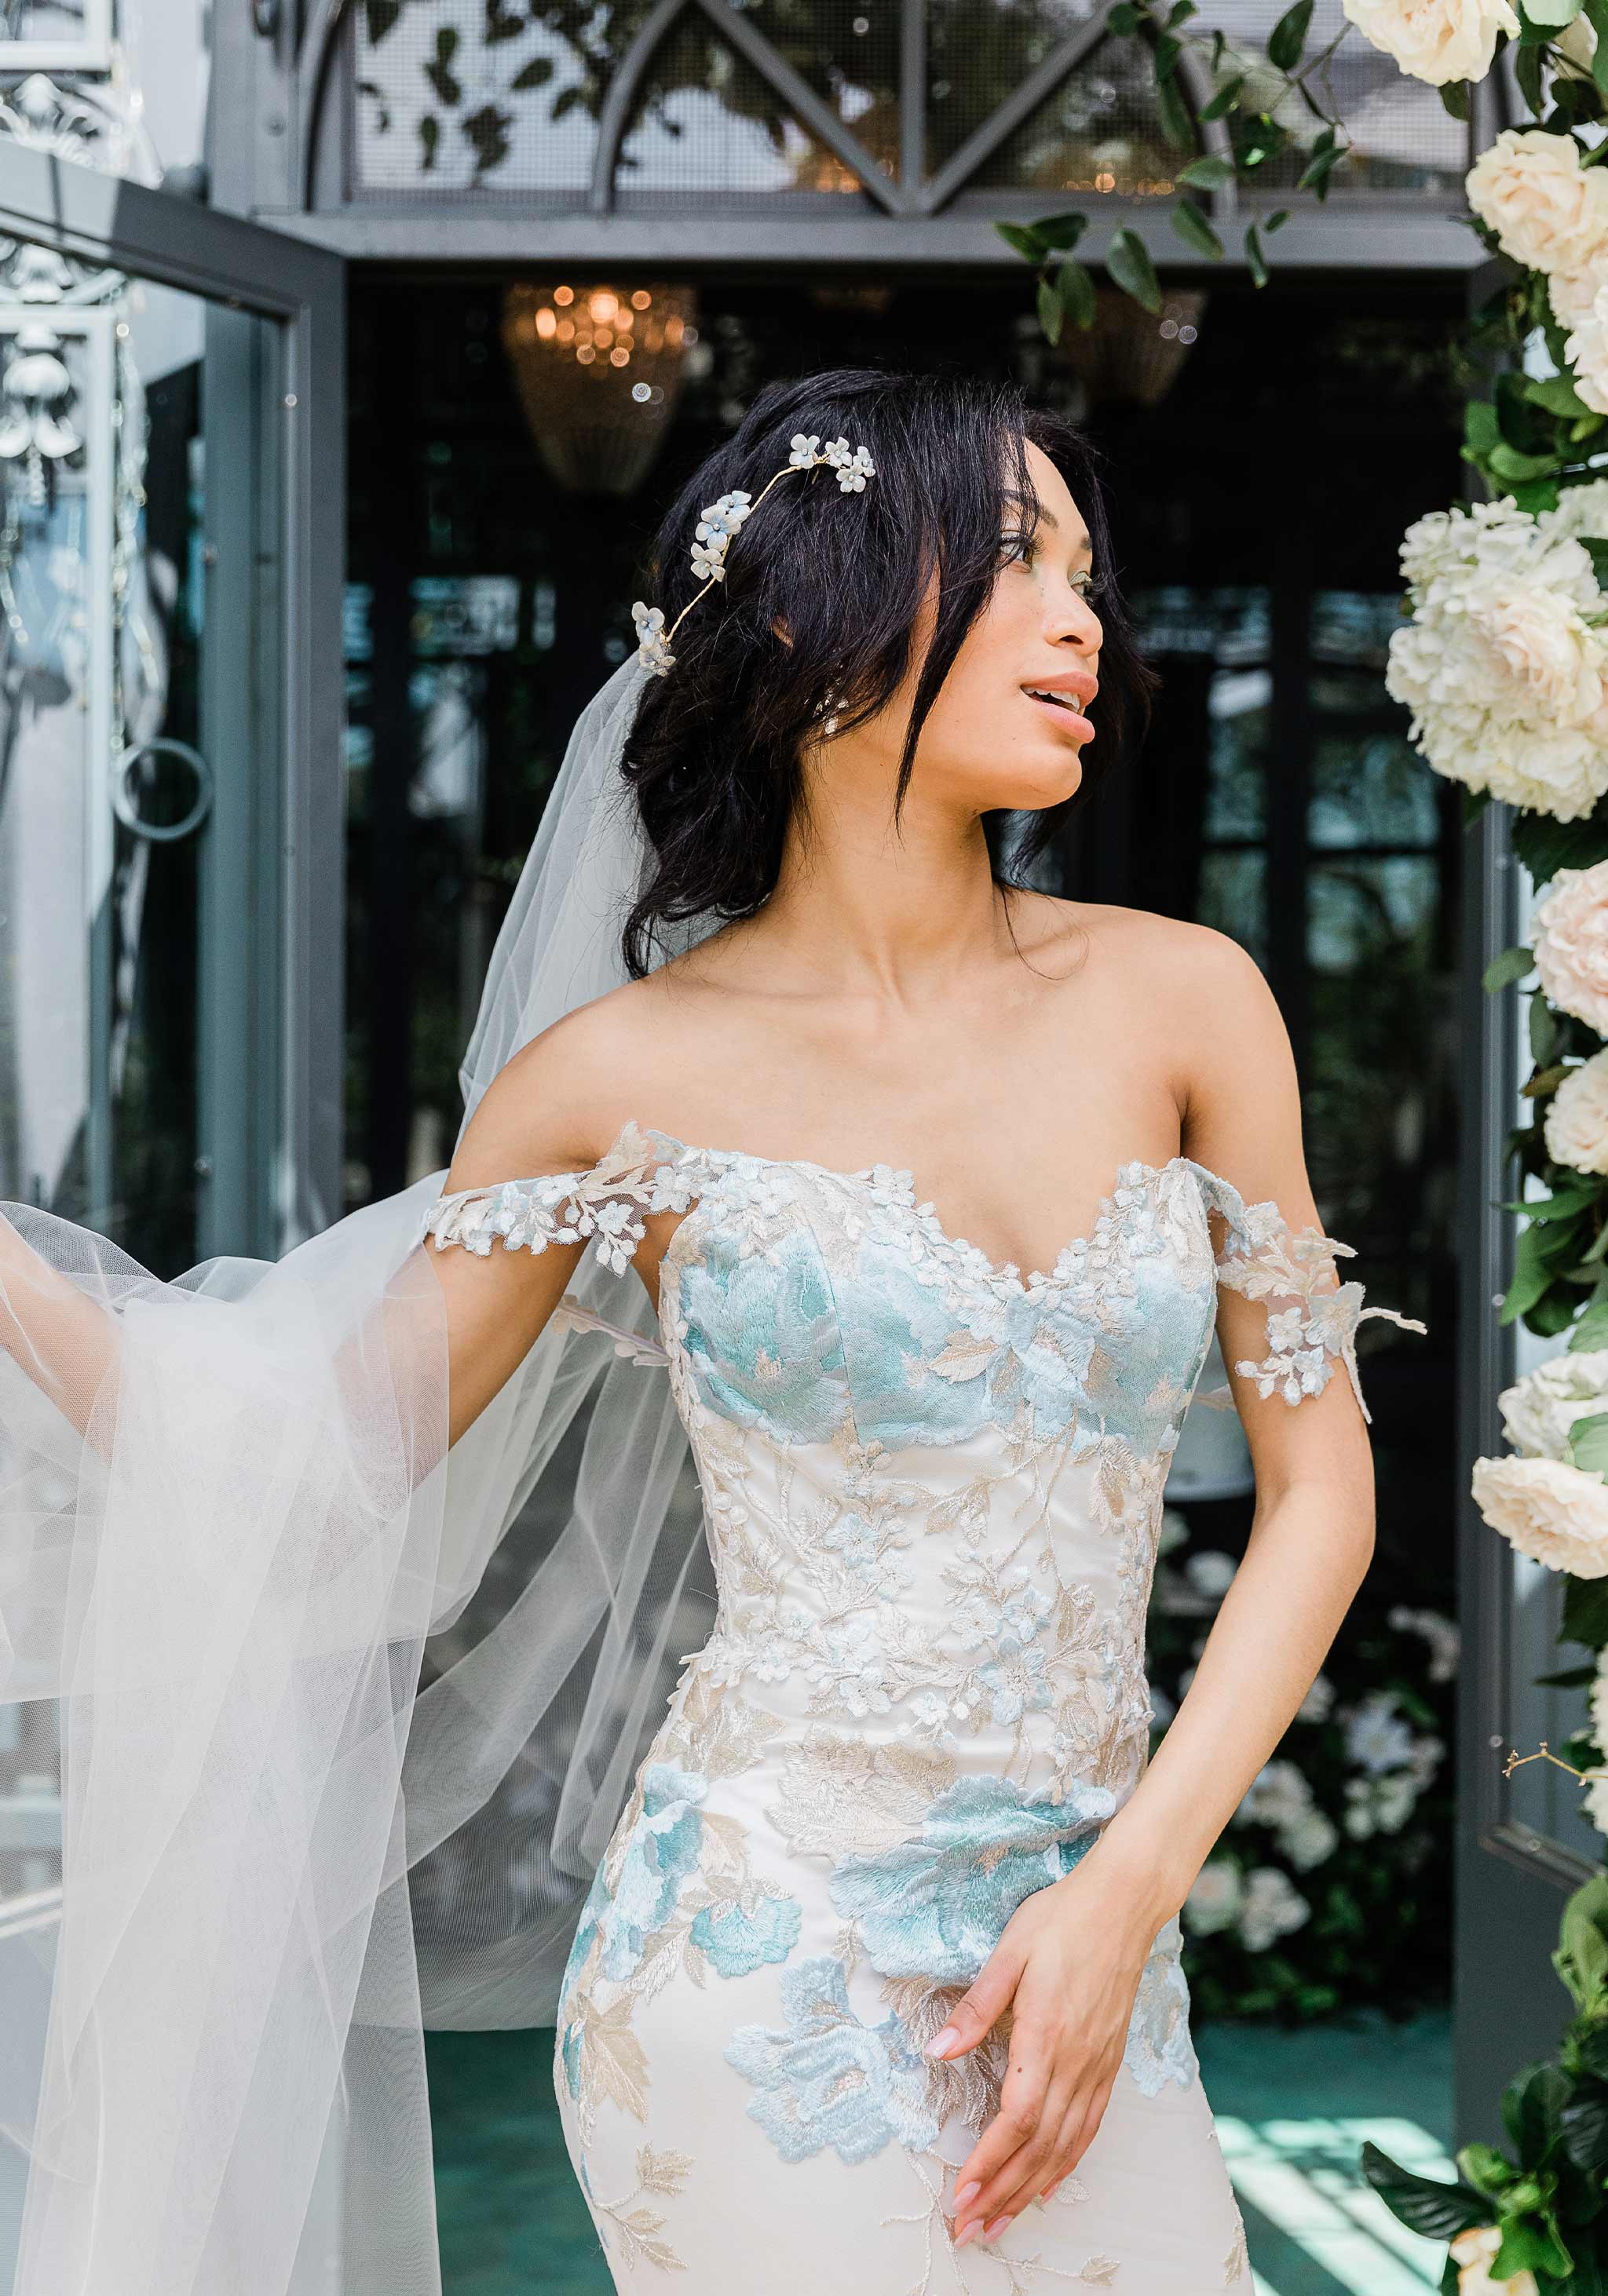 Odessa Blue with Sexy Peek-a-Boo Wedding Dress with Floral Detail